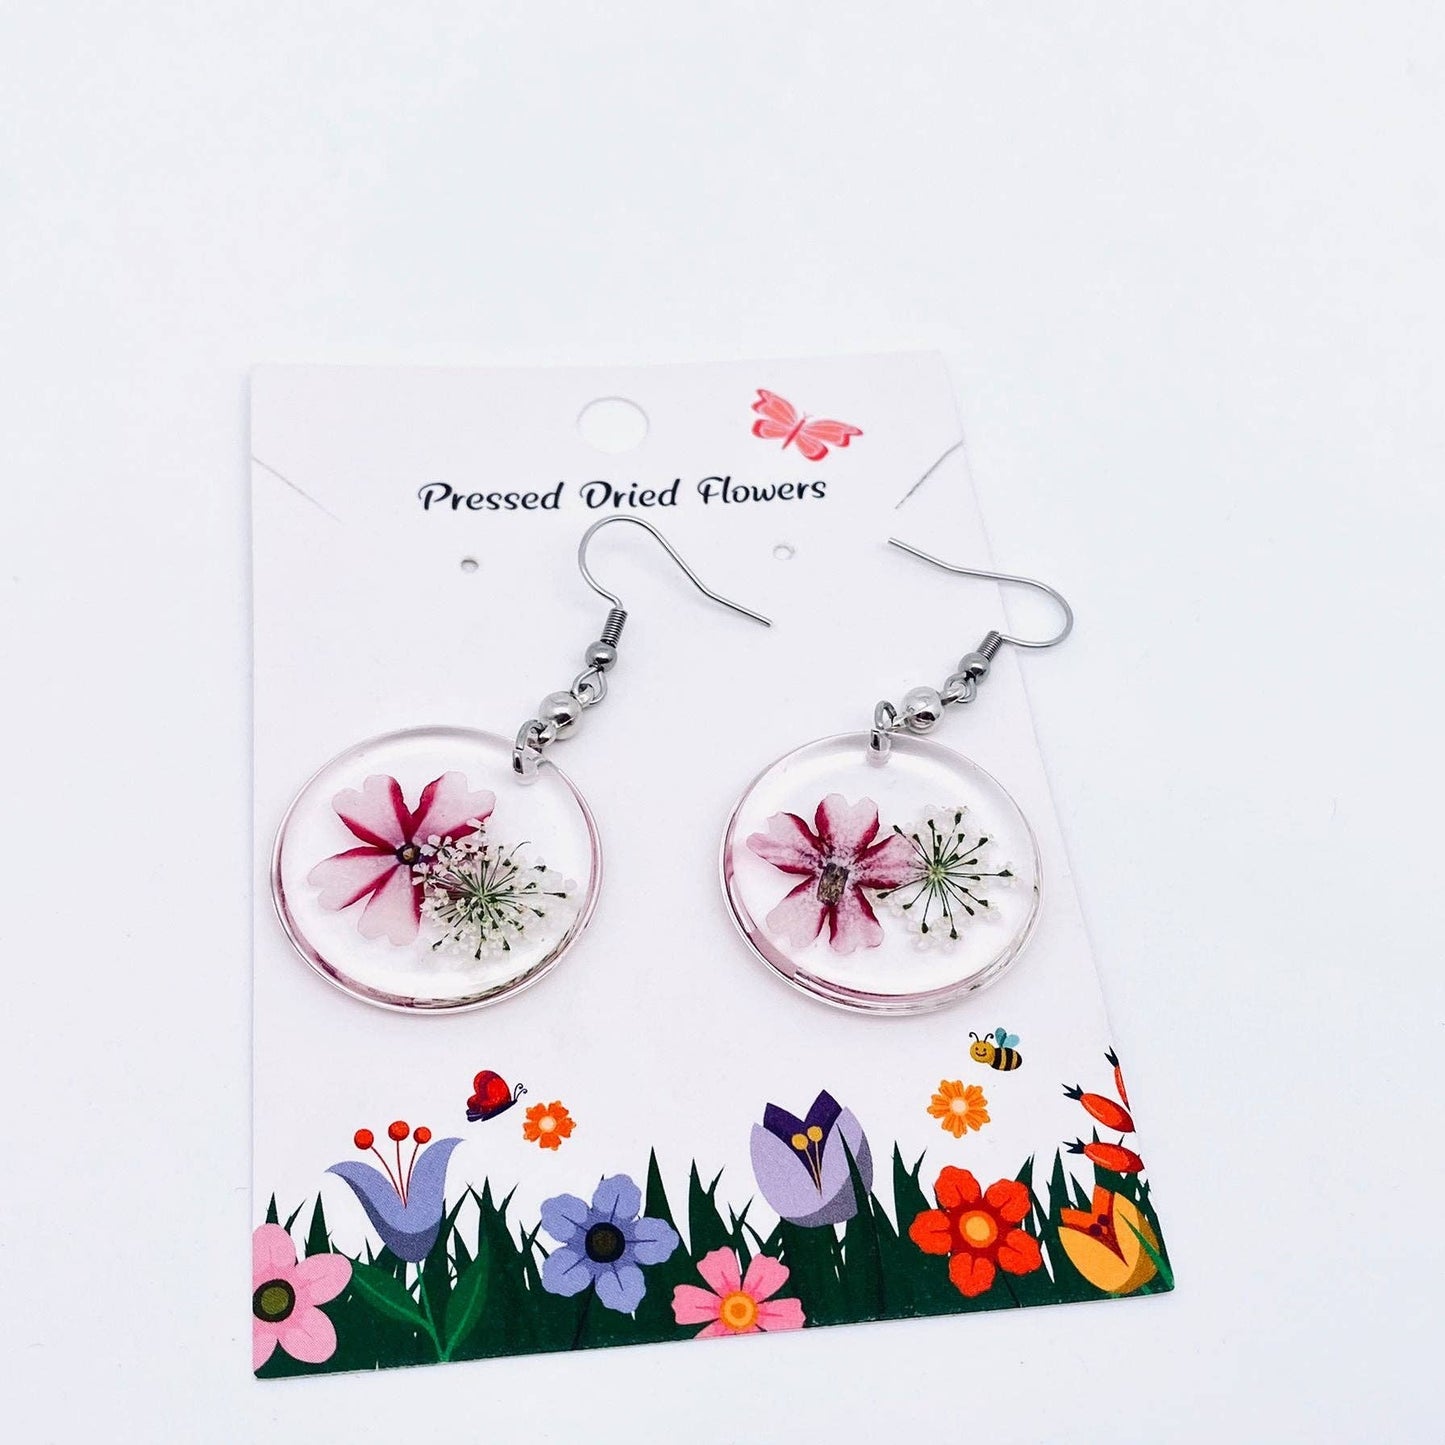 Verbena & Queen Anne's Lace Floral Borderless Charm Earrings